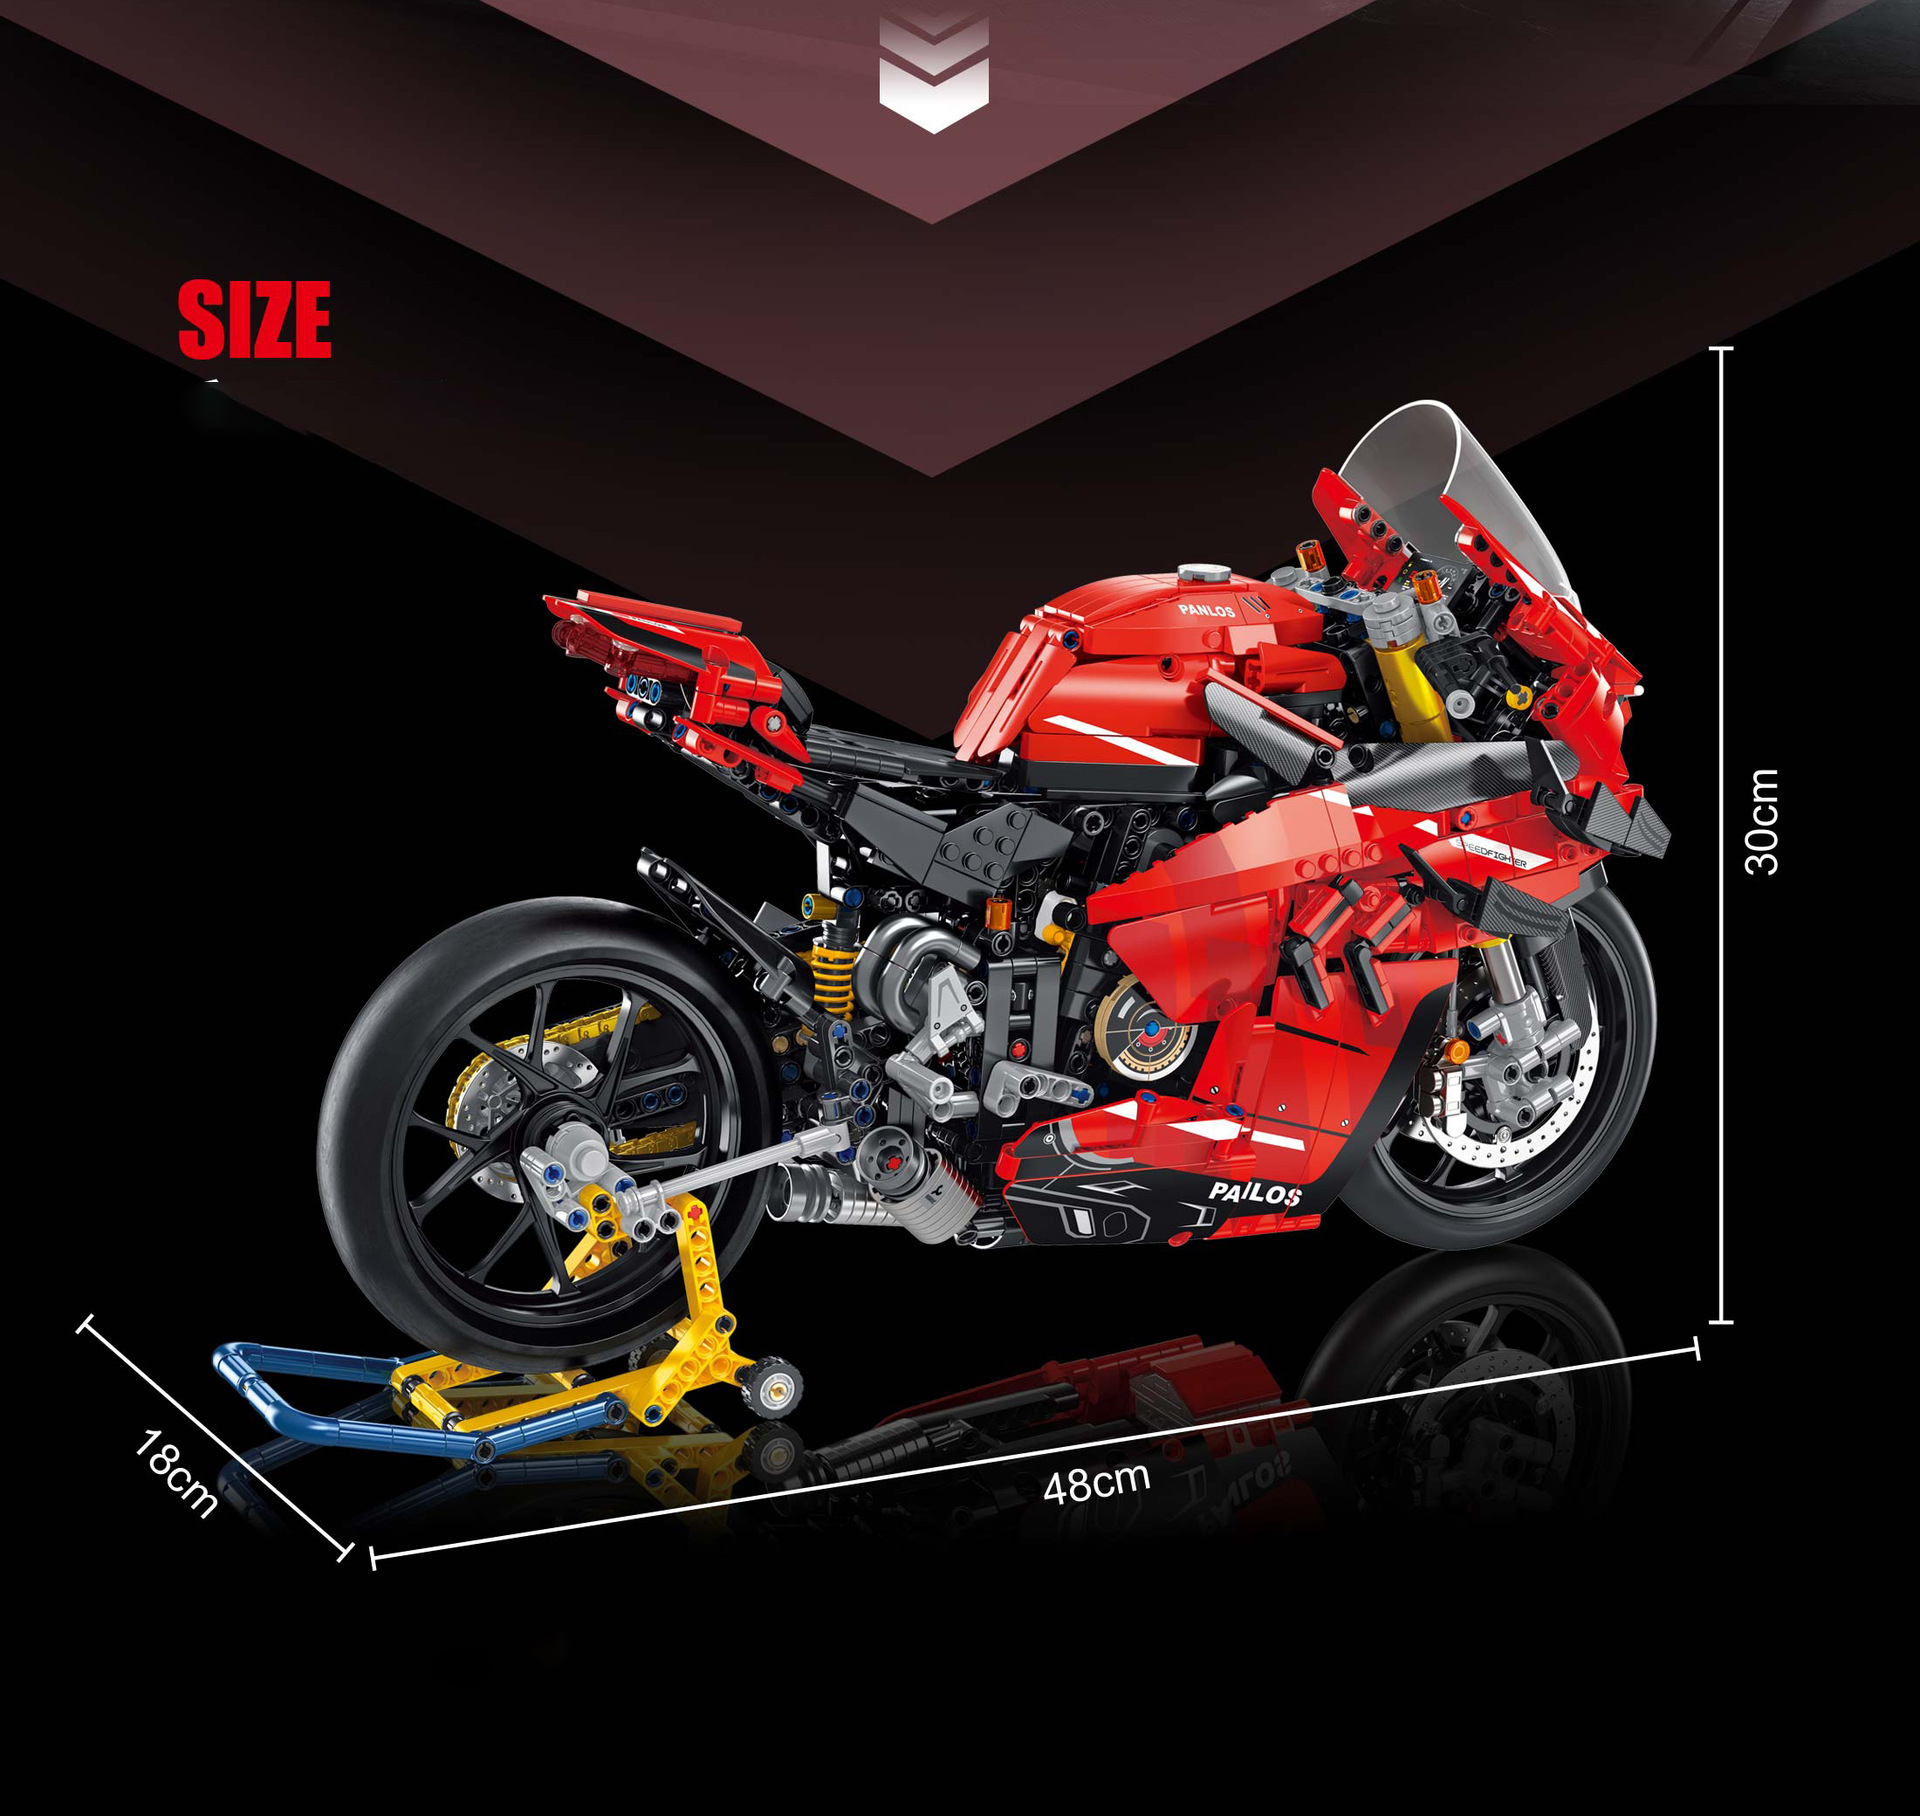 Technic PANLOS 672101 1:5 Red Ducati V4S Motorcycle 